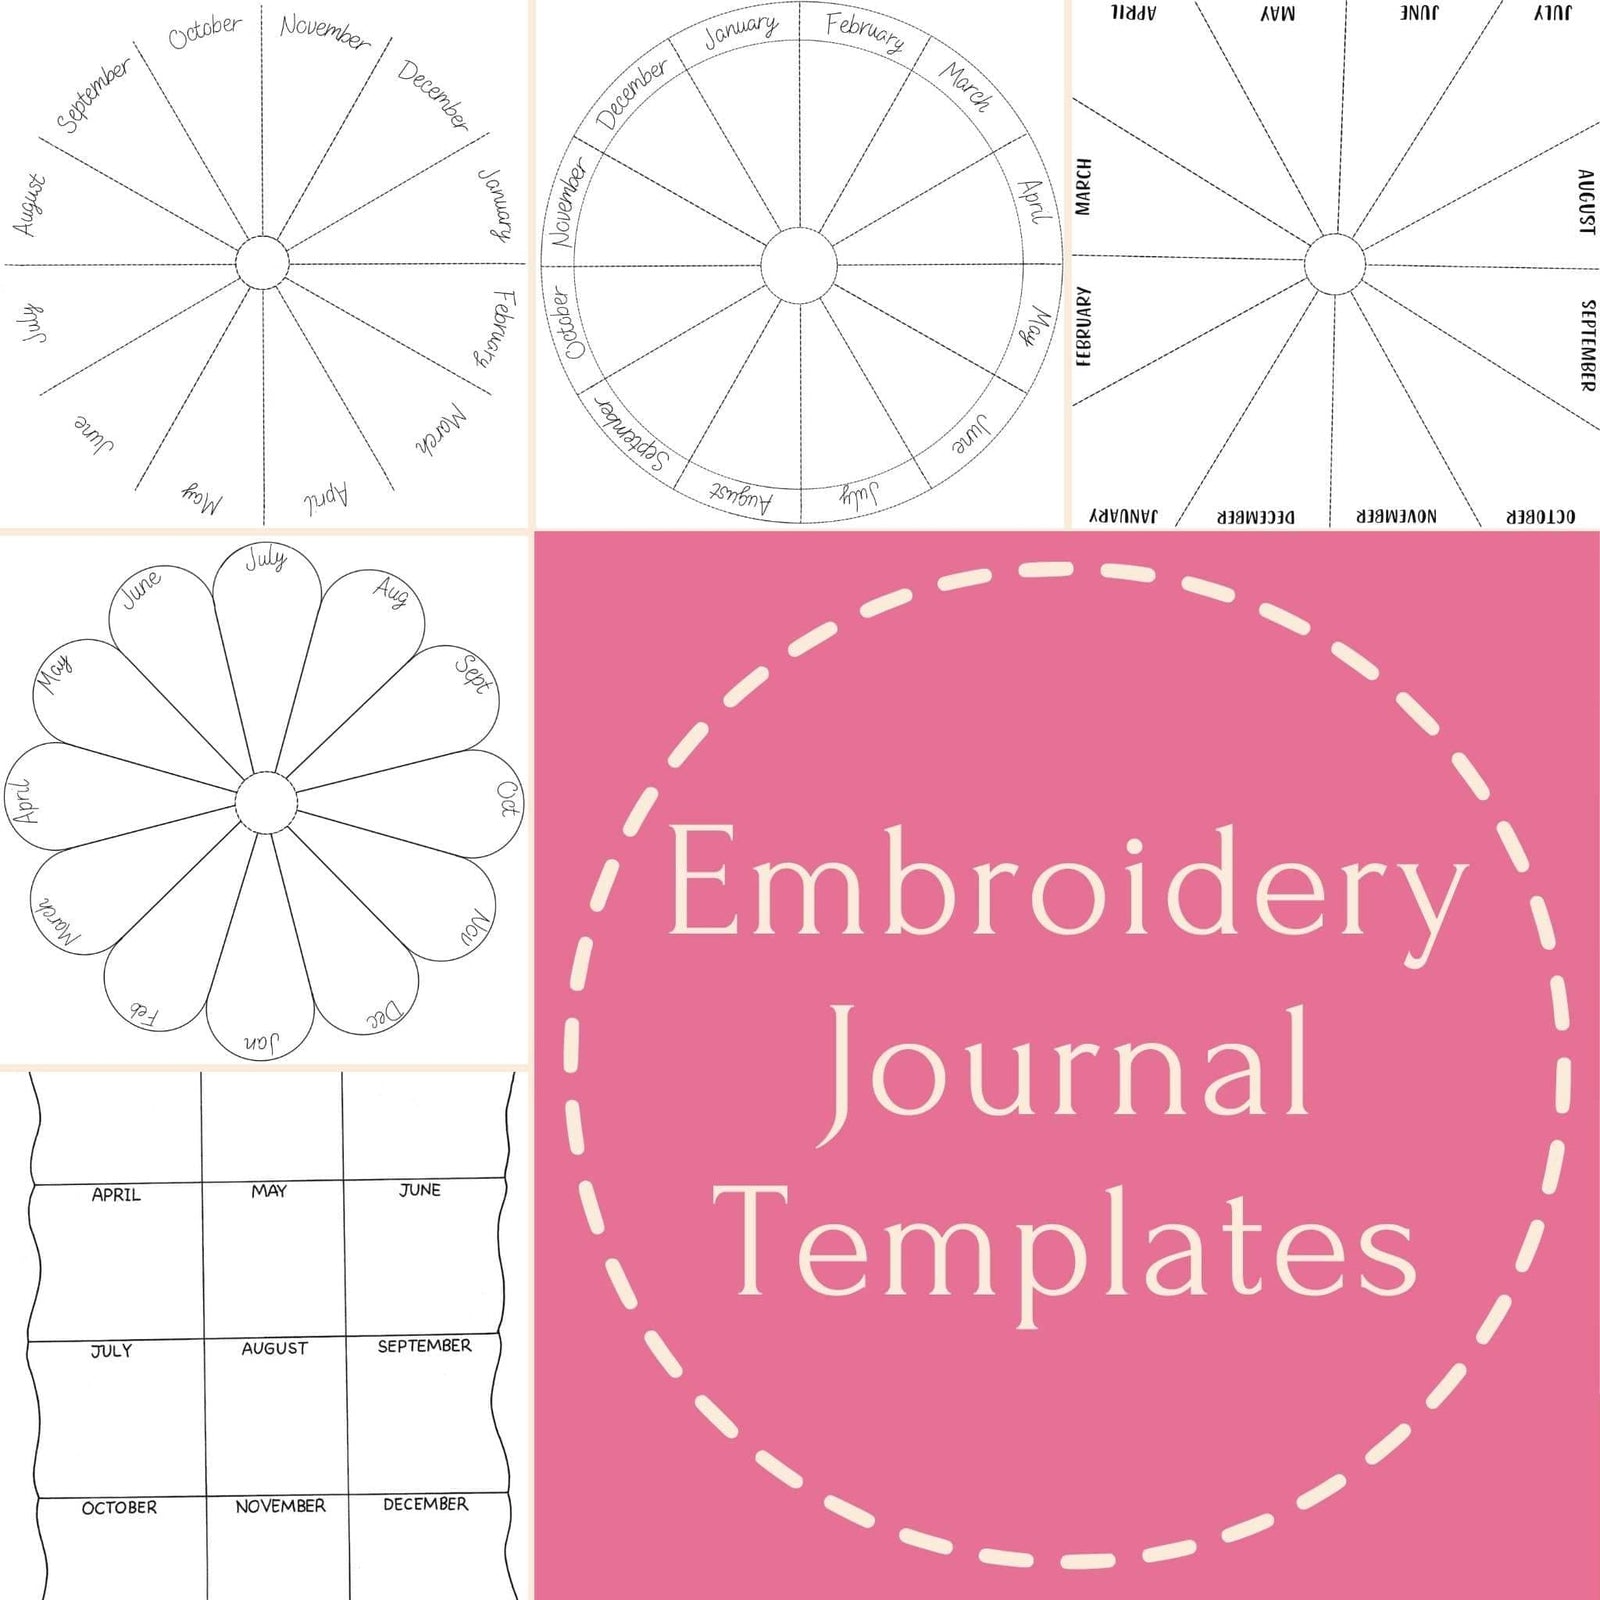 Embroidery Journal Hand Embroidery Templates , PDF Download , StitchDoodles , beginner embroidery, embroidery hoop kit, embroidery kit for adults, embroidery kit for beginners, embroidery kits for adults, embroidery kits for beginers, embroidery pattern, hand embroidery, modern embroidery kits, PDF pattern , StitchDoodles , shop.stitchdoodles.com